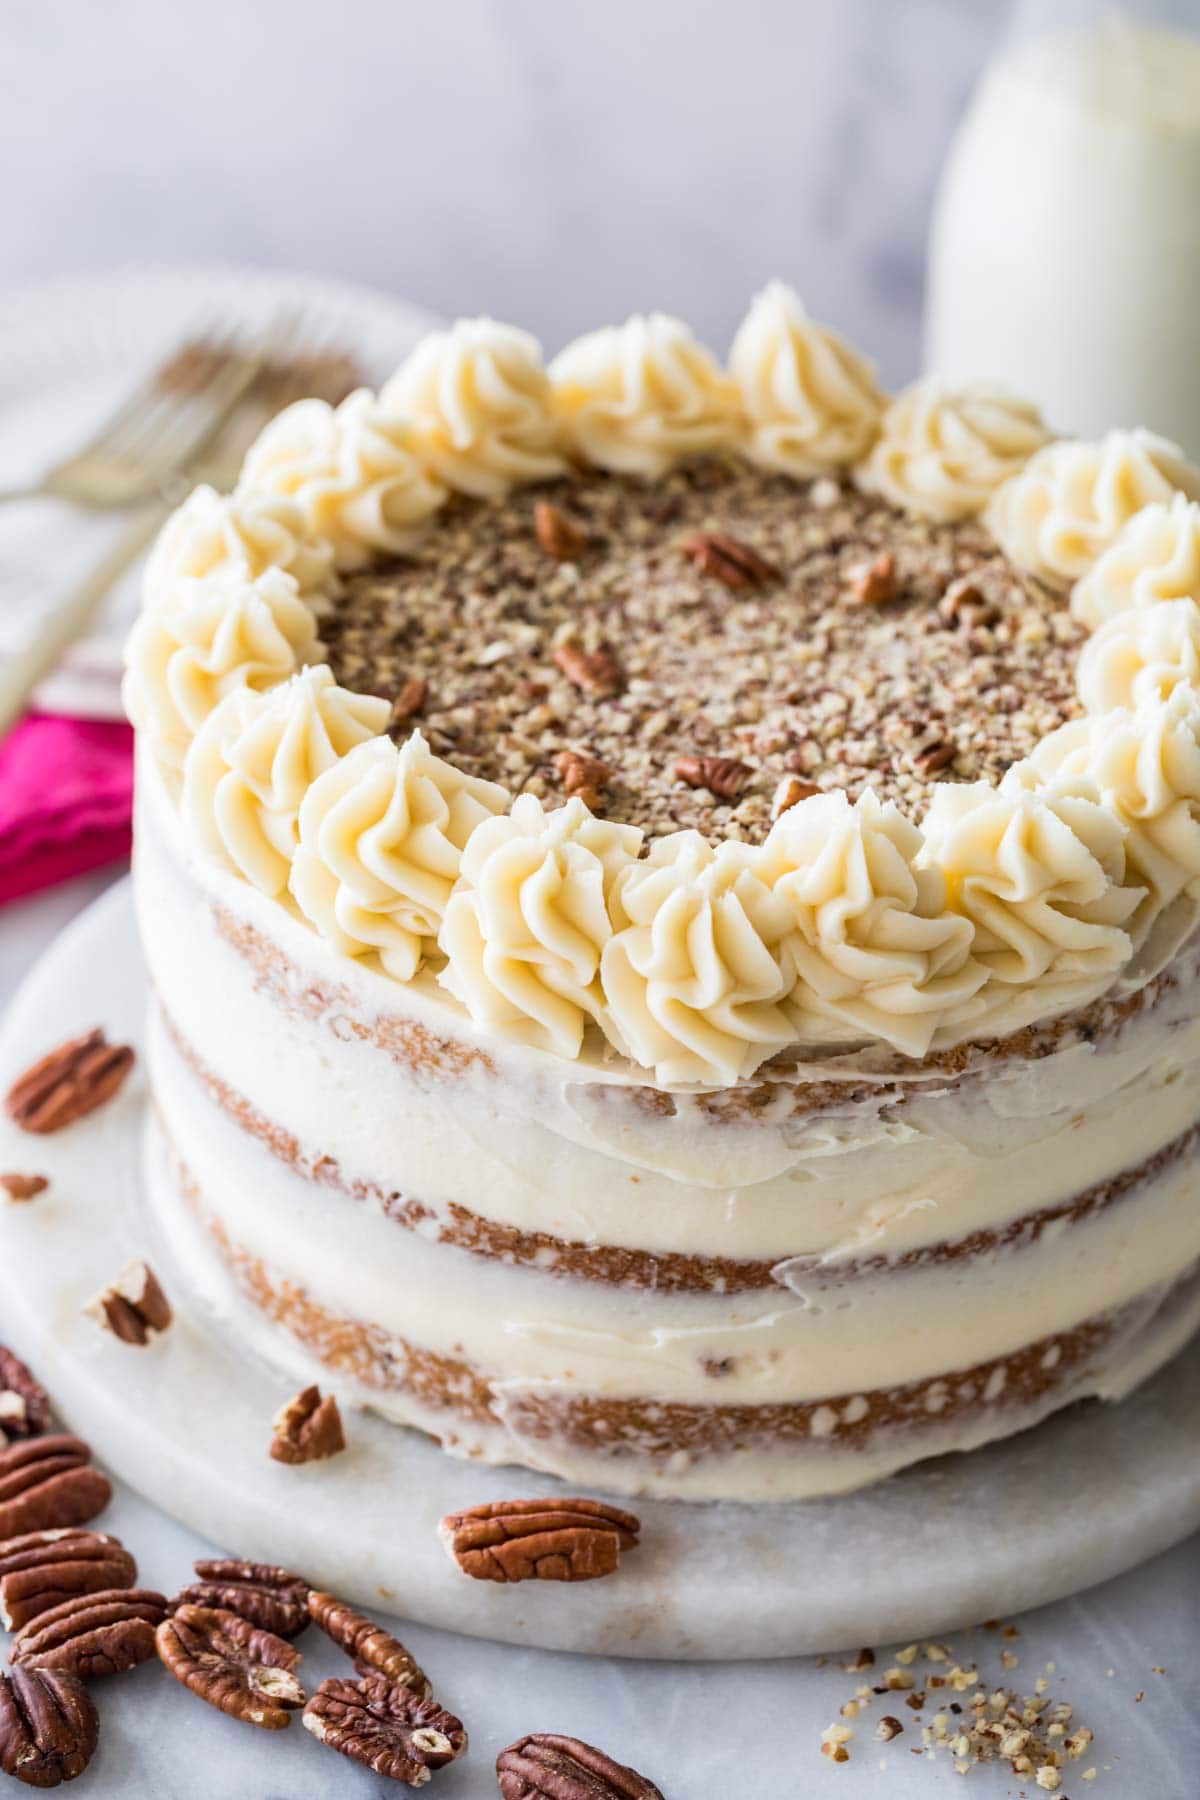 Cake frosted naked style with finely chopped pecans and icing swirls on top.